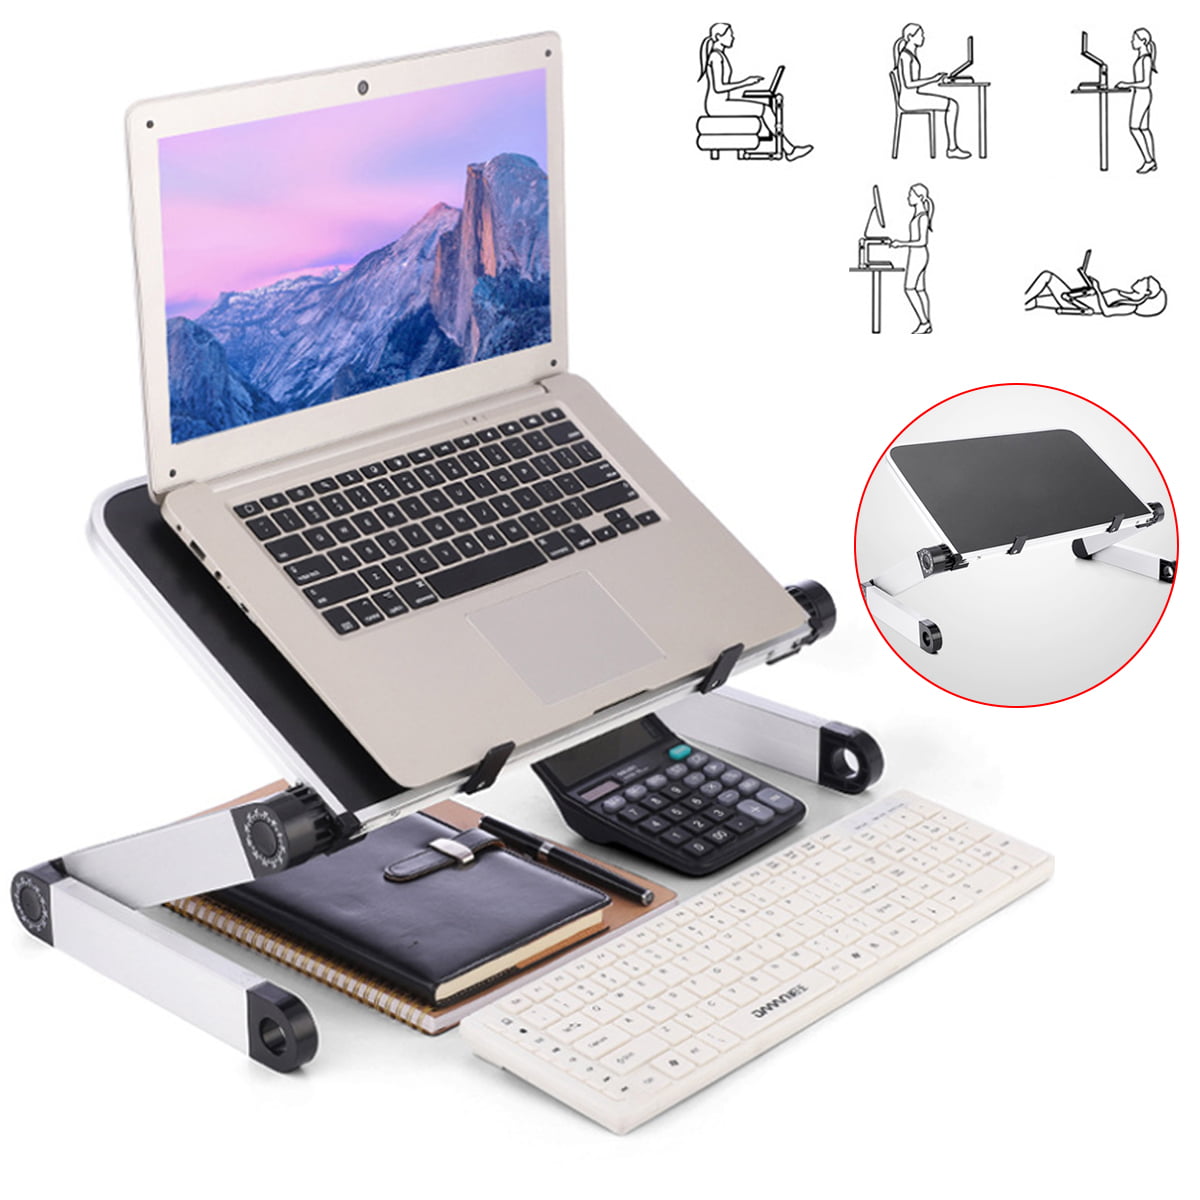 Details about   Laptop Cooling Stand Tray Holder Riser Desk Table for Bed Sofa Adjustable w/Fan 